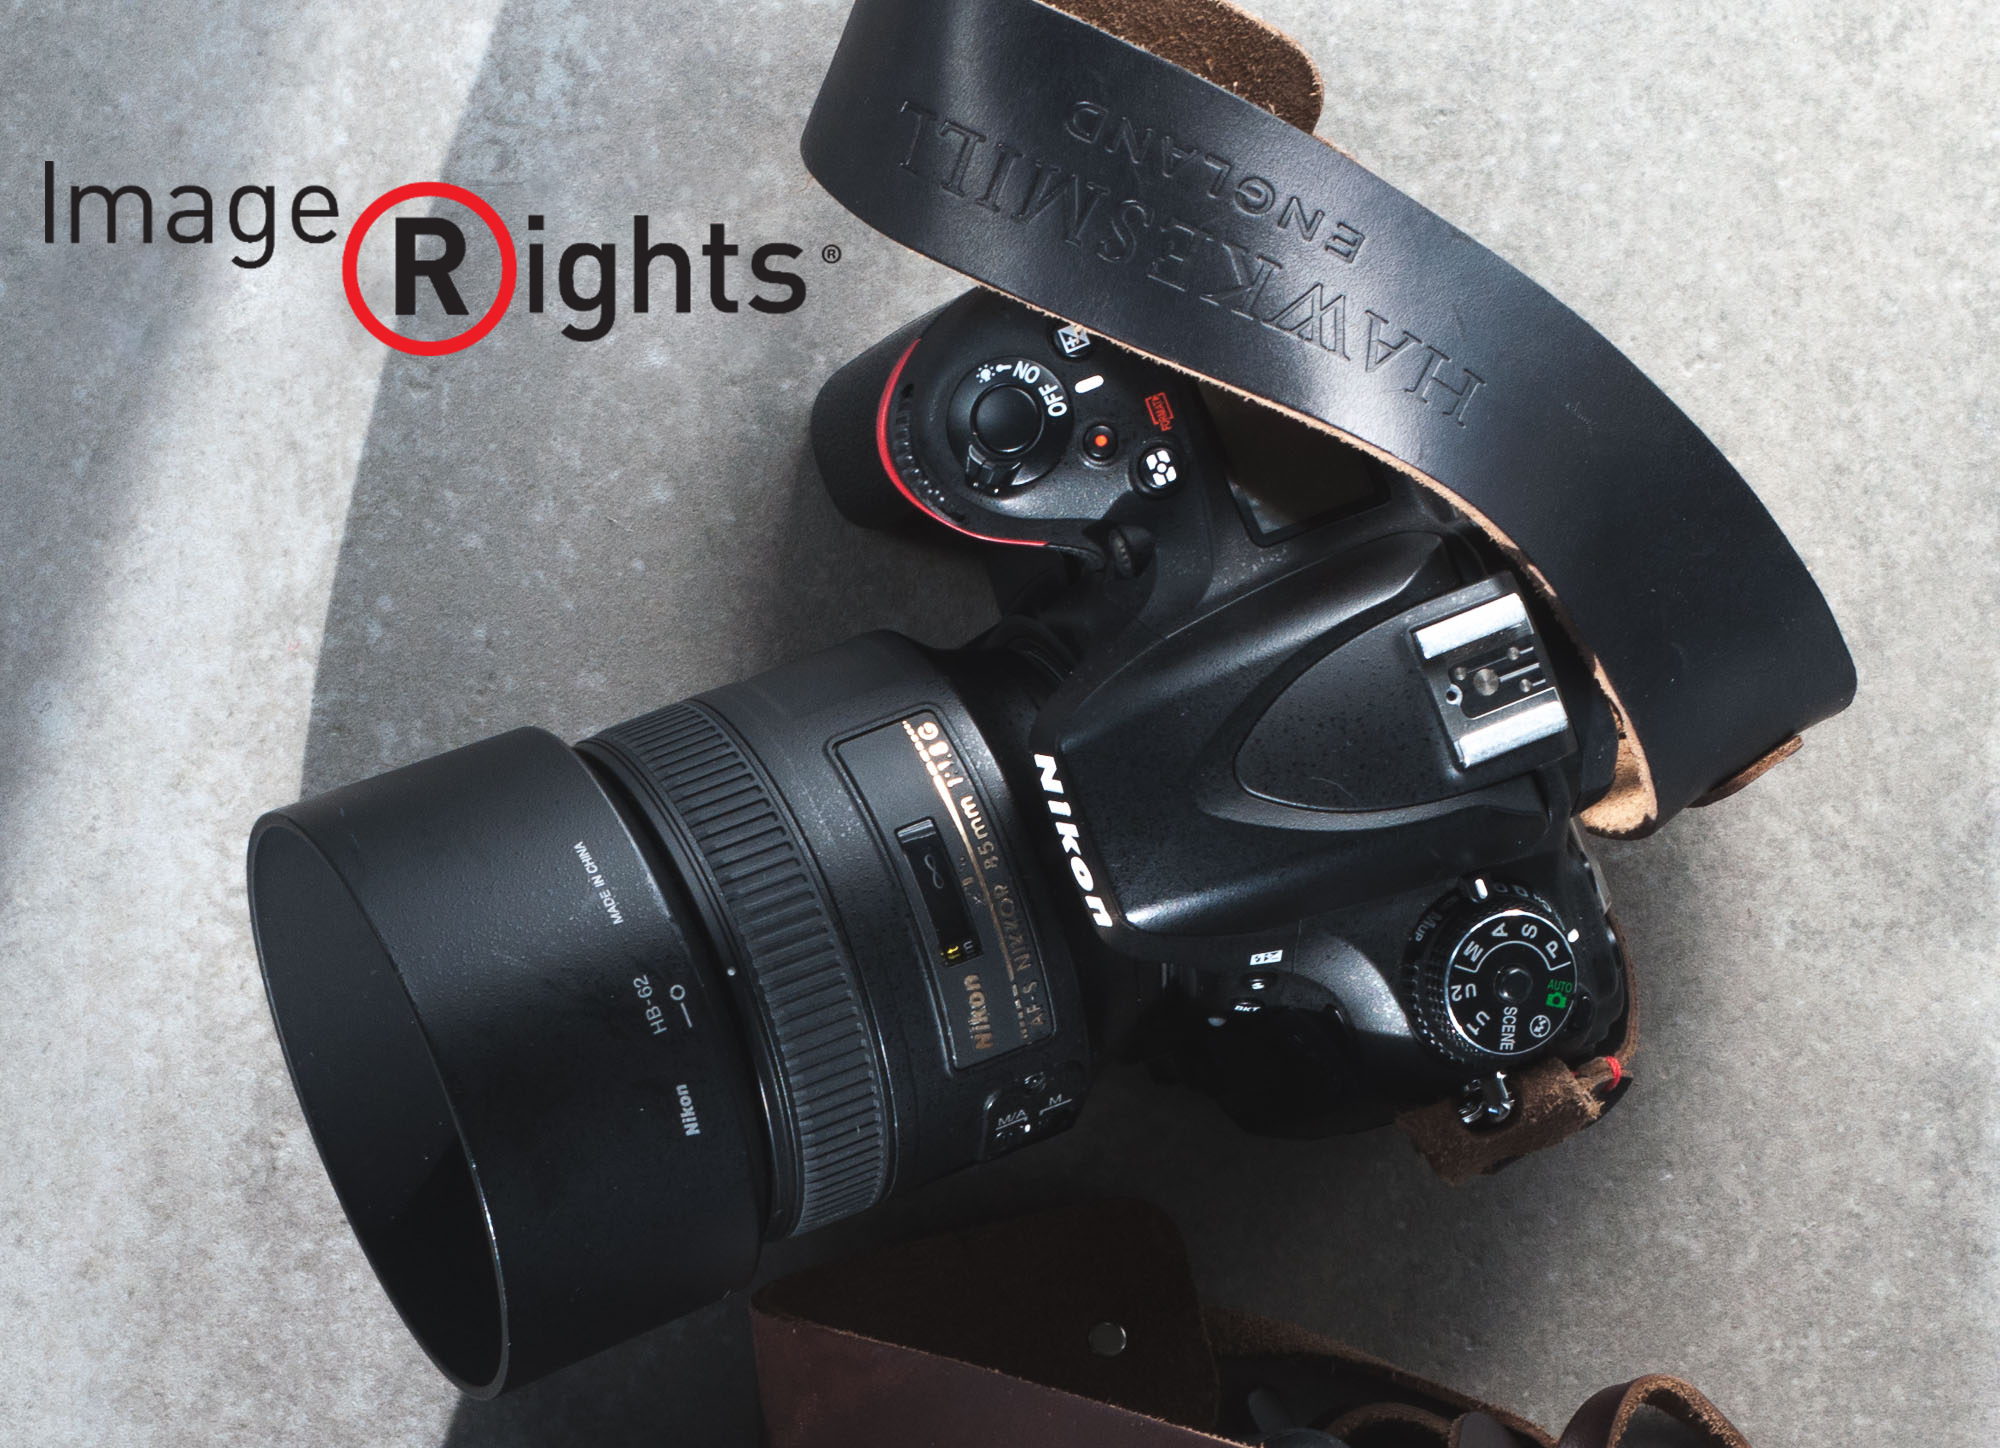 Copyright Infringement Laws Guide | ImageRights Copyright Primer & Cheat Sheet